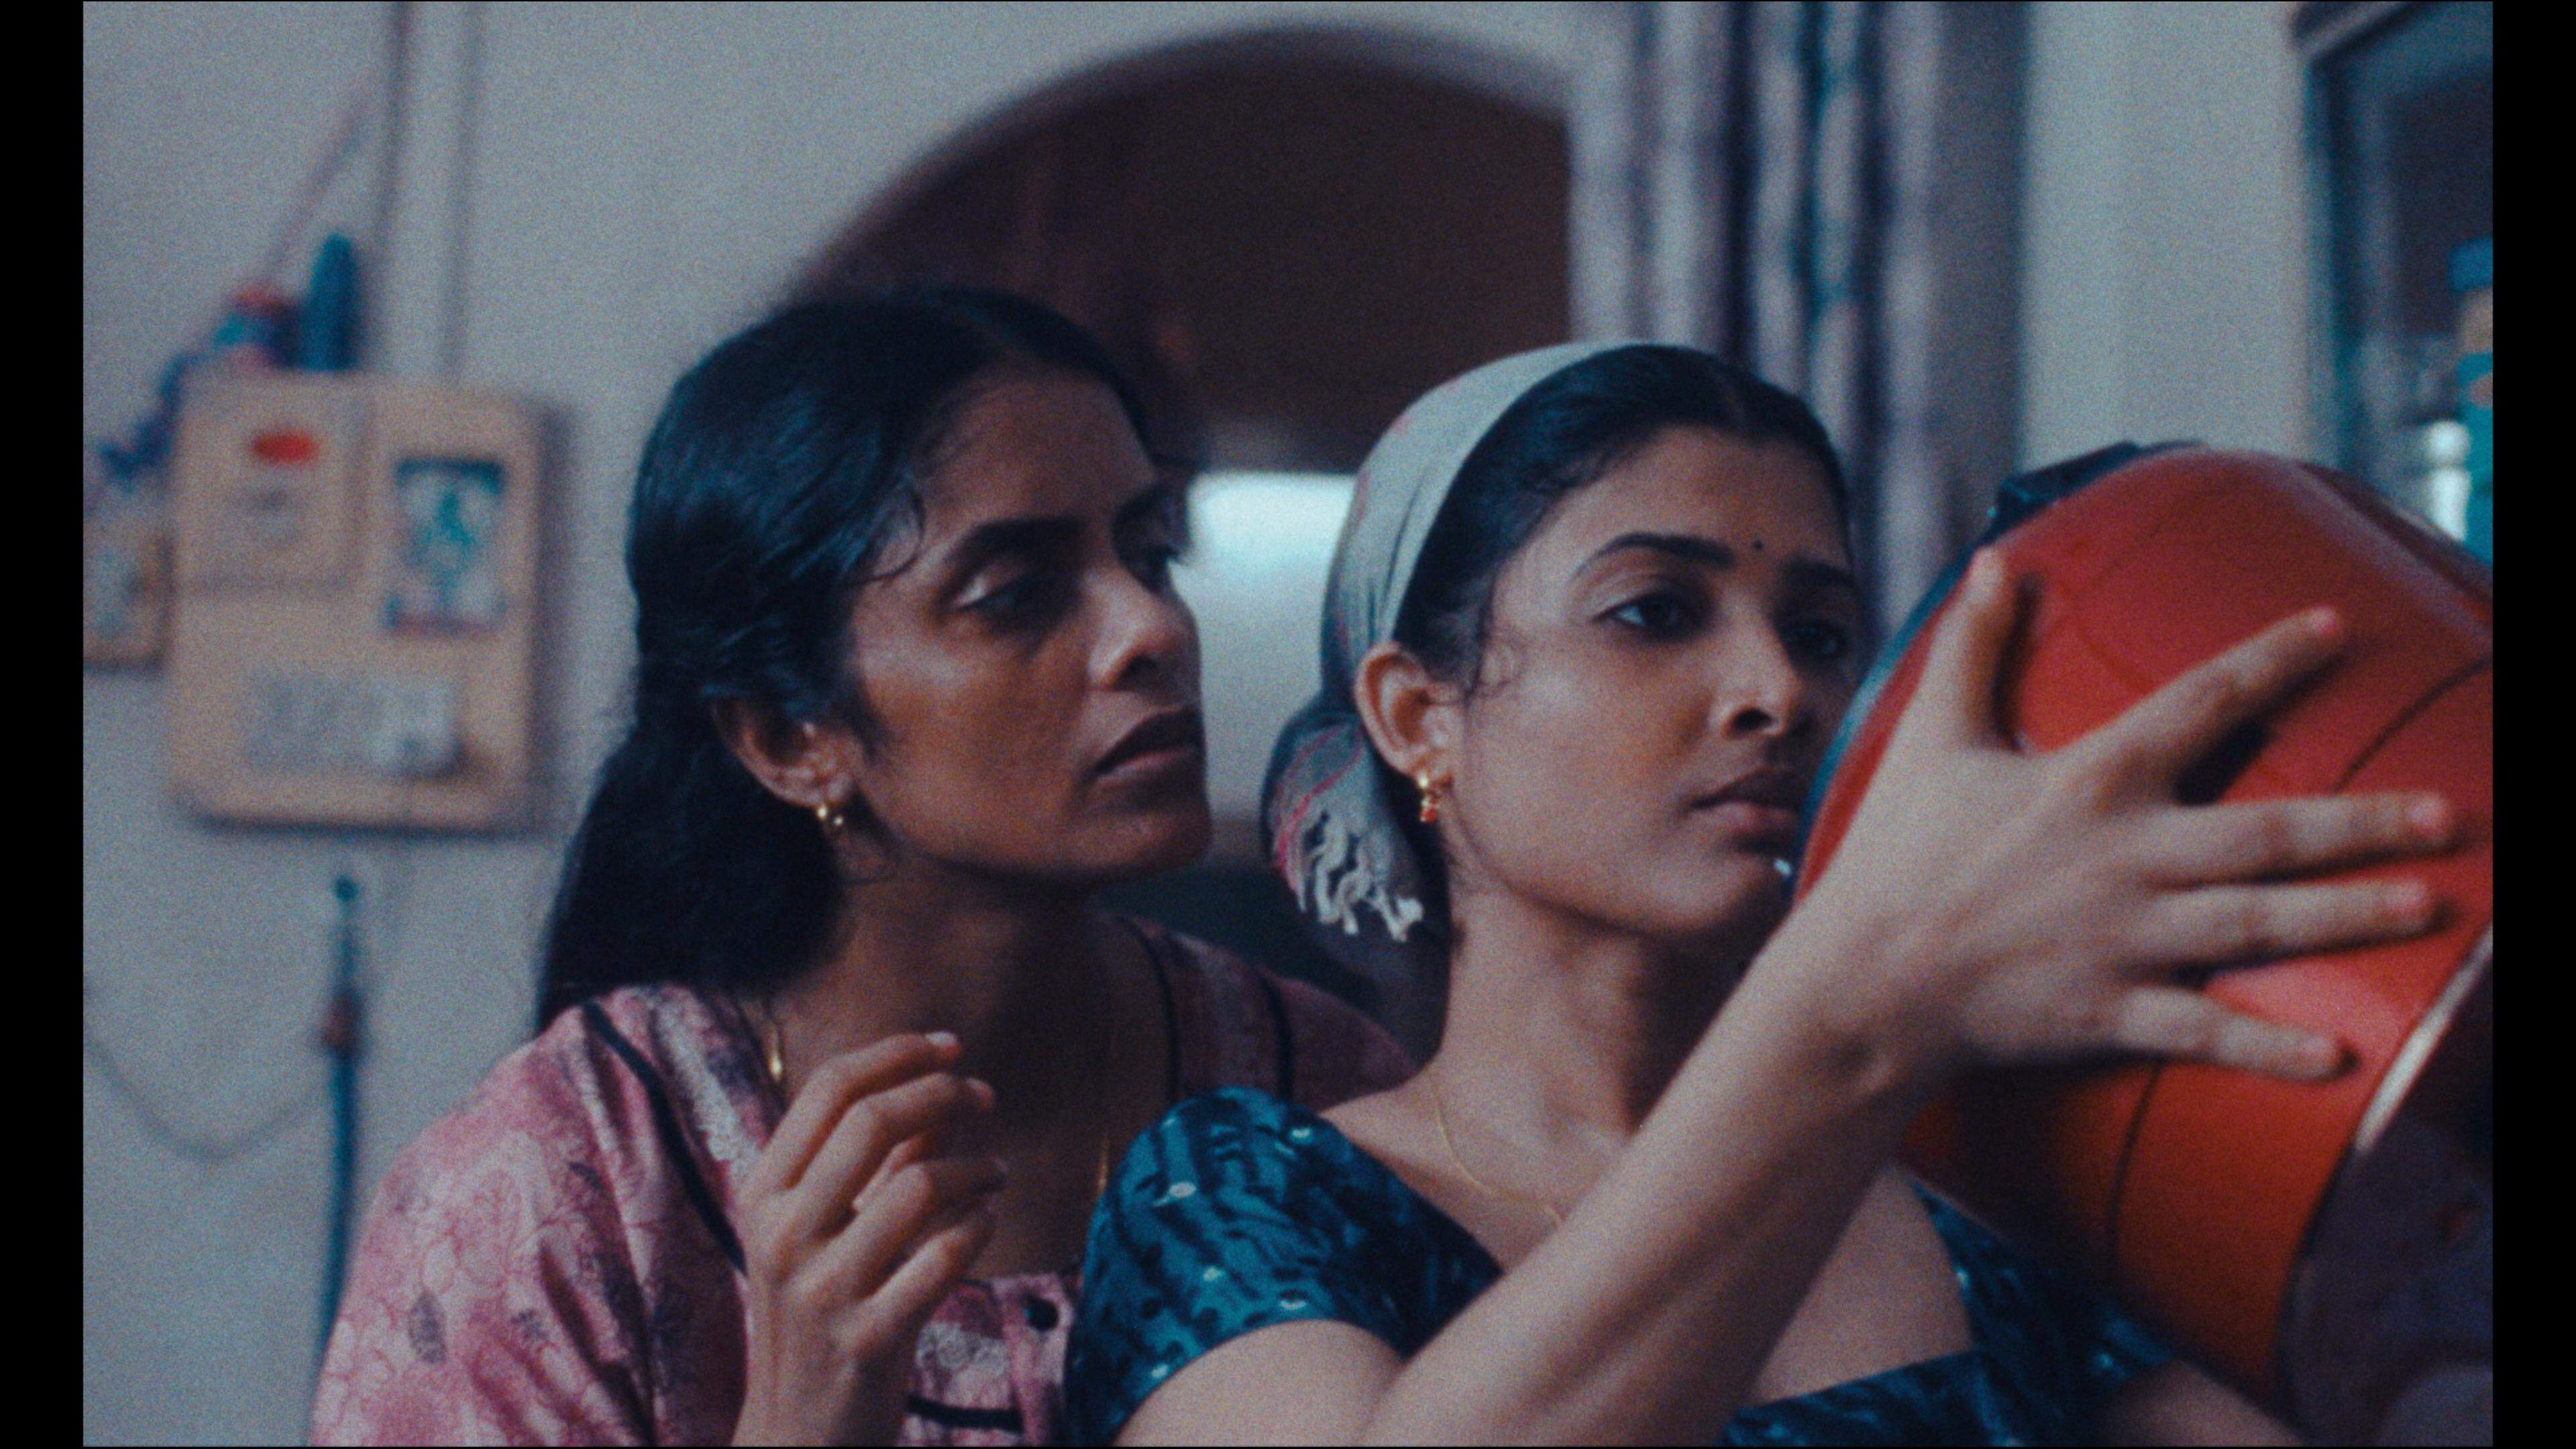  Payal Kapadia’s ‘All We Imagine as Light’, the first Indian film to compete for the Palme d’Or since 1994, received financial support to the tune of €50,000 from the Film Fund Luxembourg